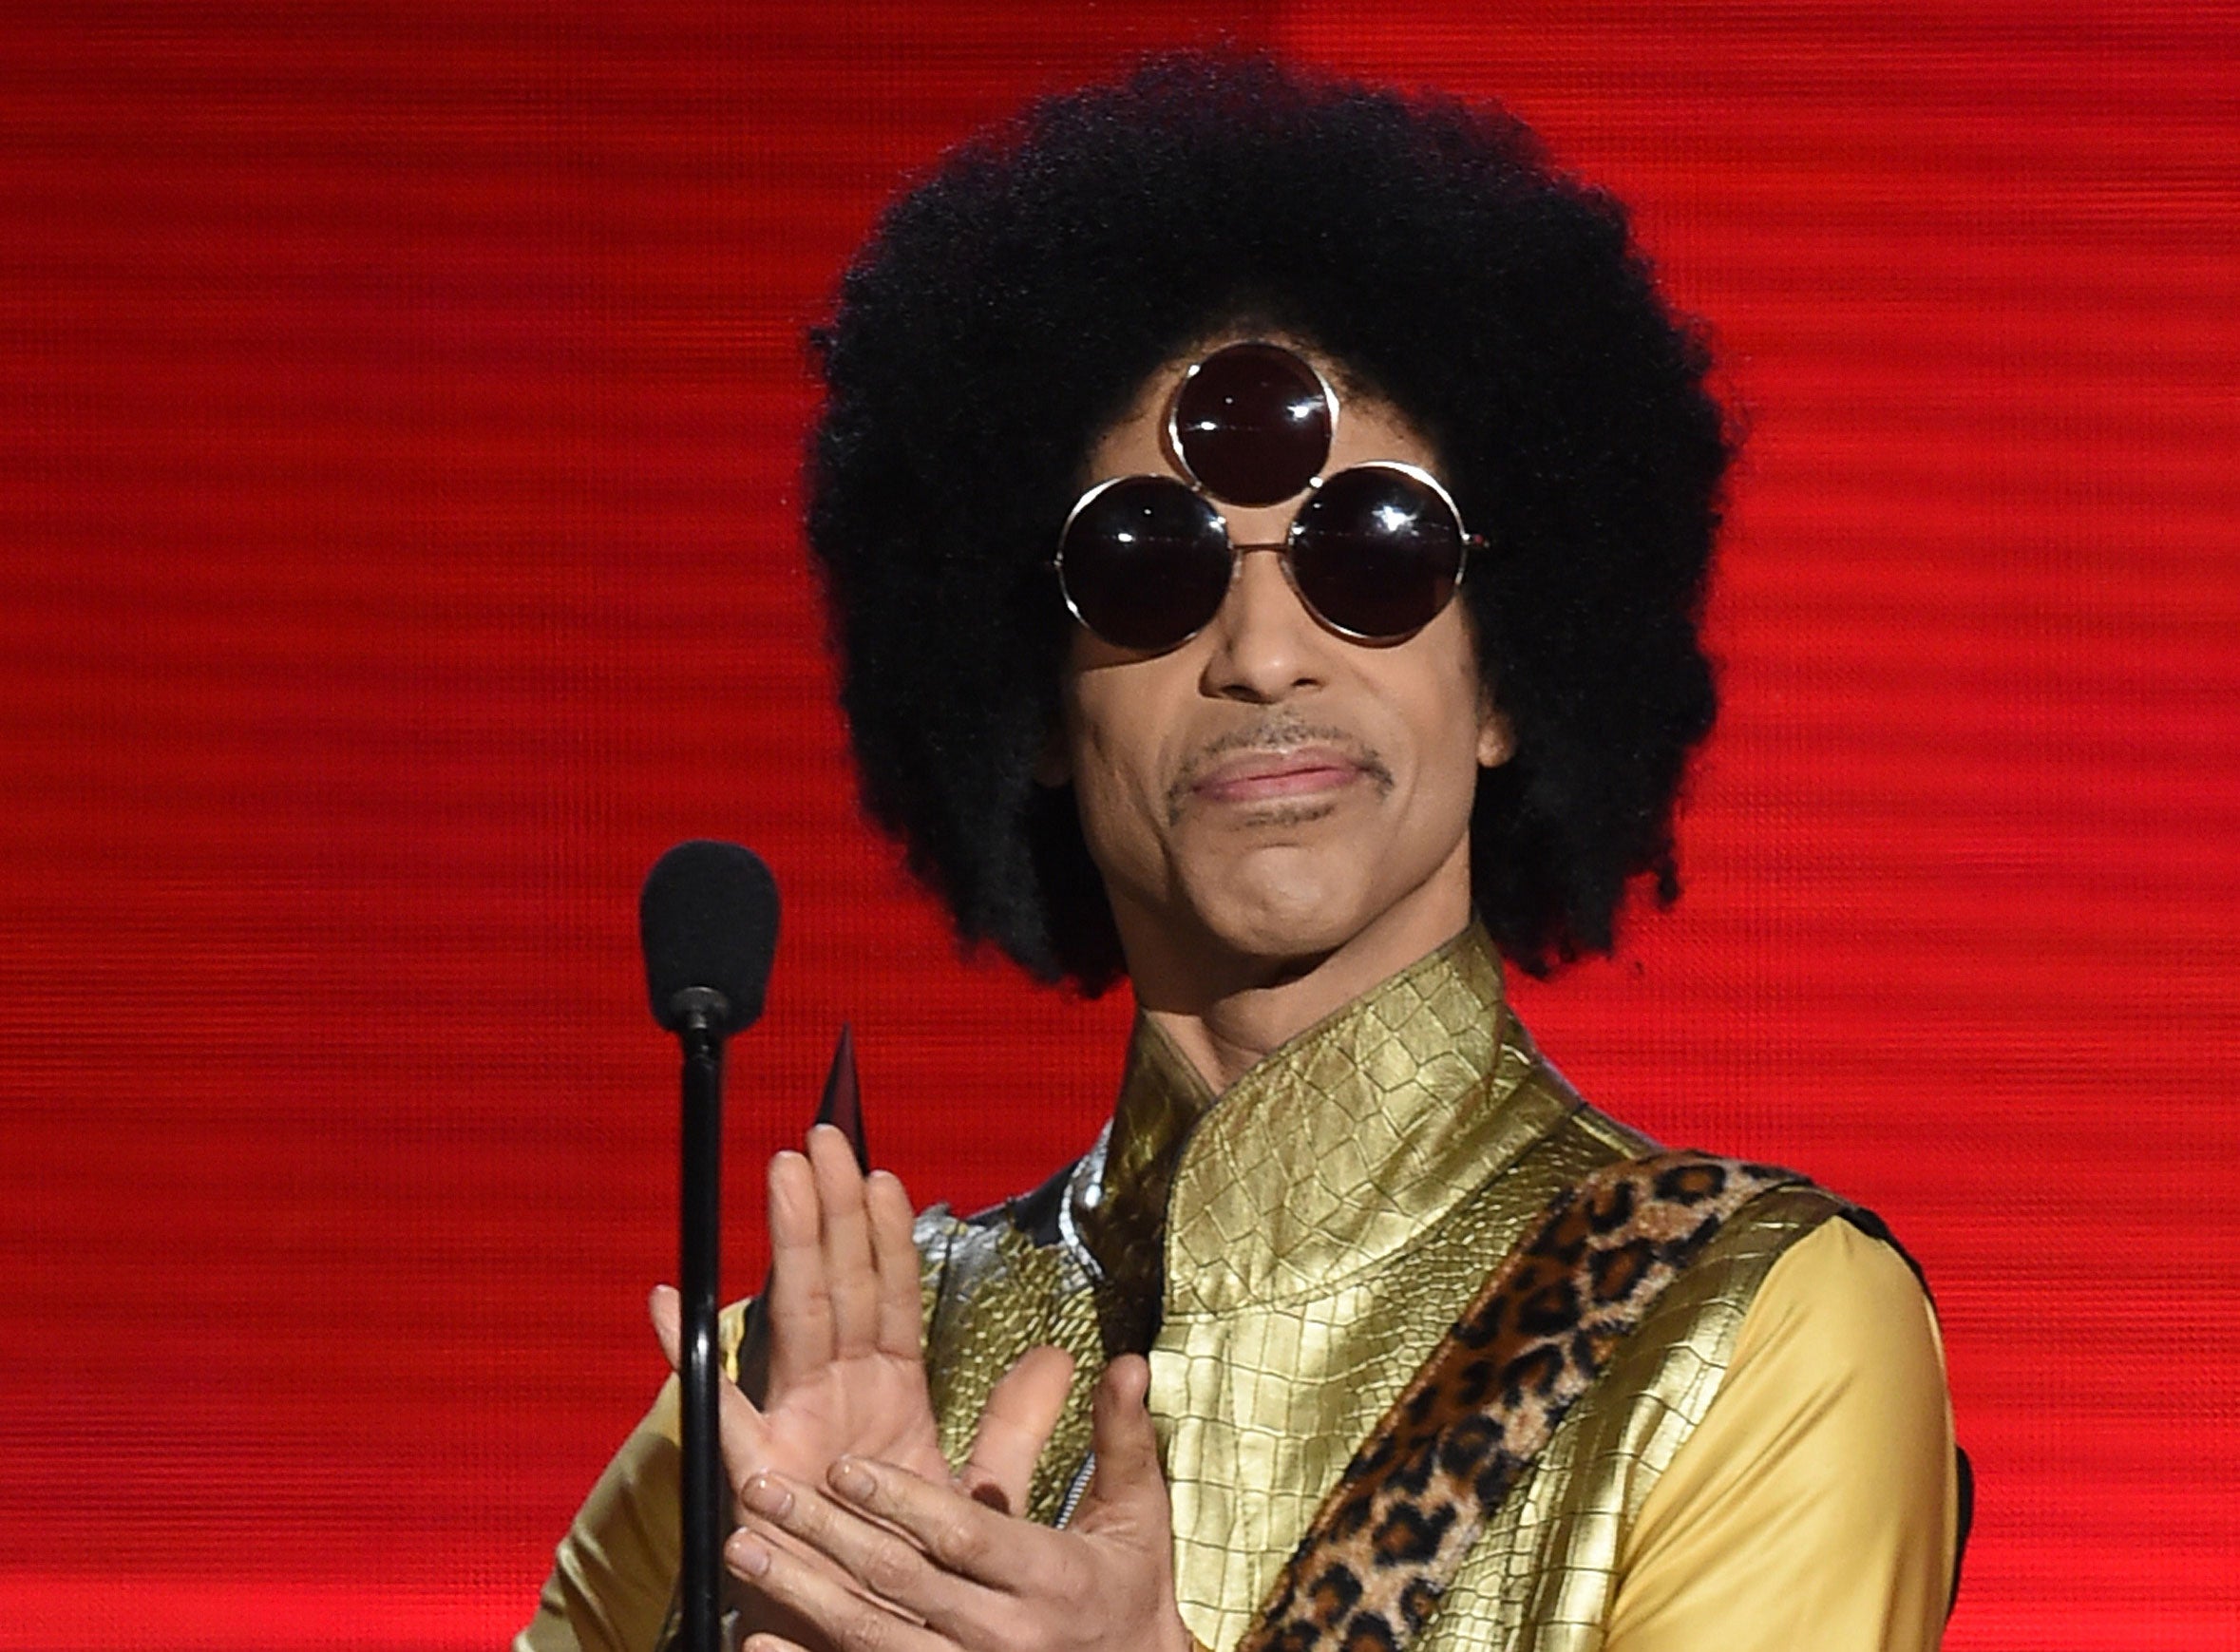 Prince's Family Attends Court Hearing To Determine Who Will Gain Control Of His Estate
